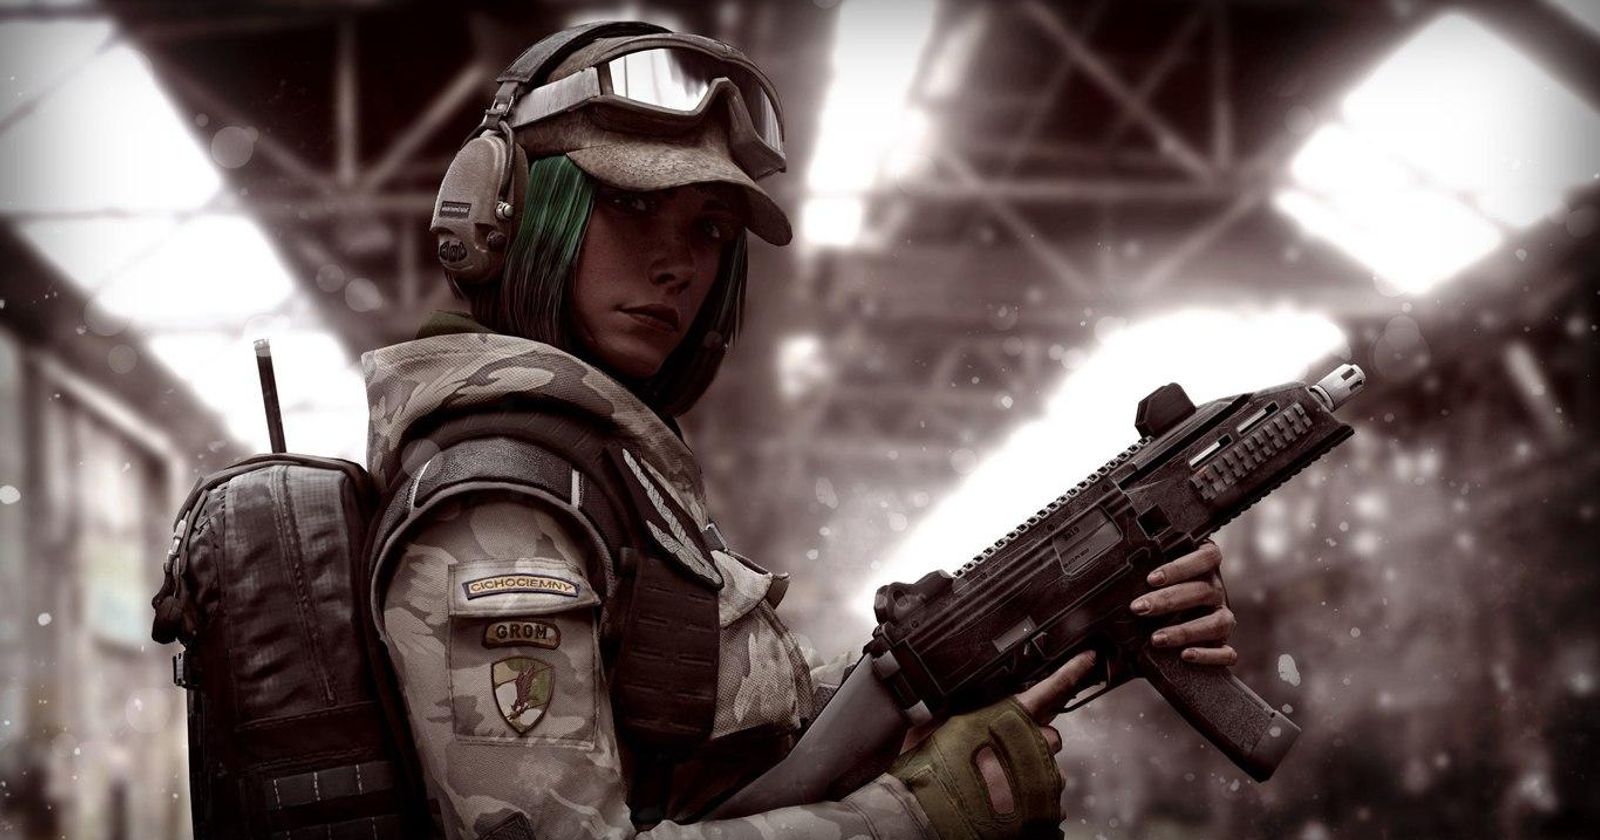 Does Rainbow Six Extraction have crossplay?